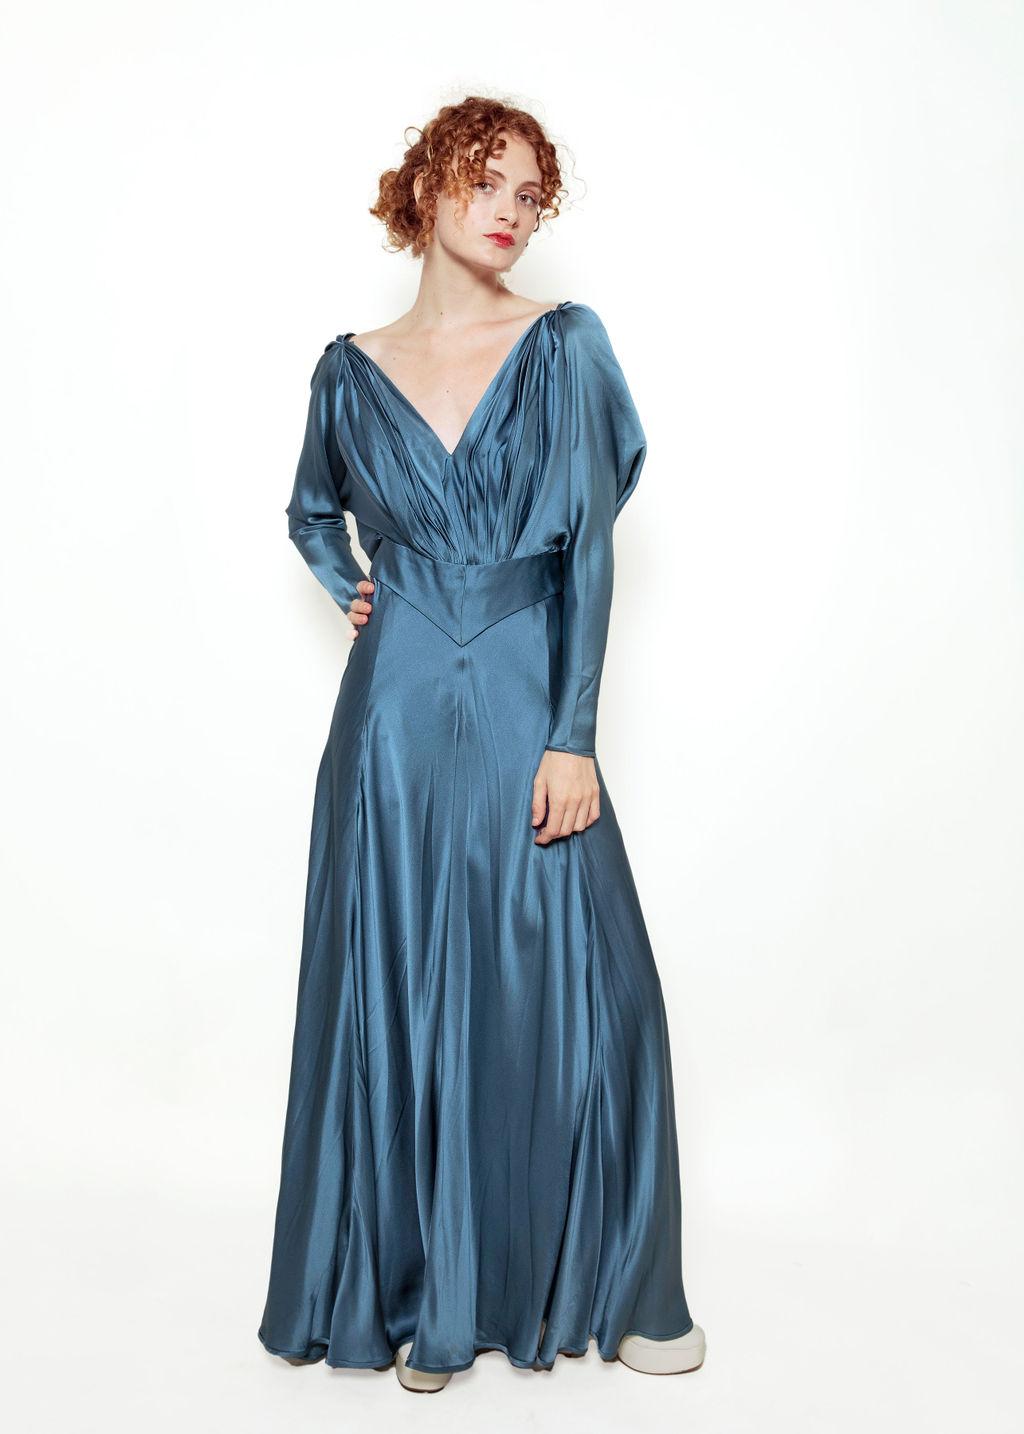 Feel like a princess in this one-of-a-kind blue silk gown!

Featuring a deep v neck, open cross strap back, and ruched neck detailing, this gown is ultra-flattering from the front and jaw-dropping from the back thanks to the lovely rosettes. This